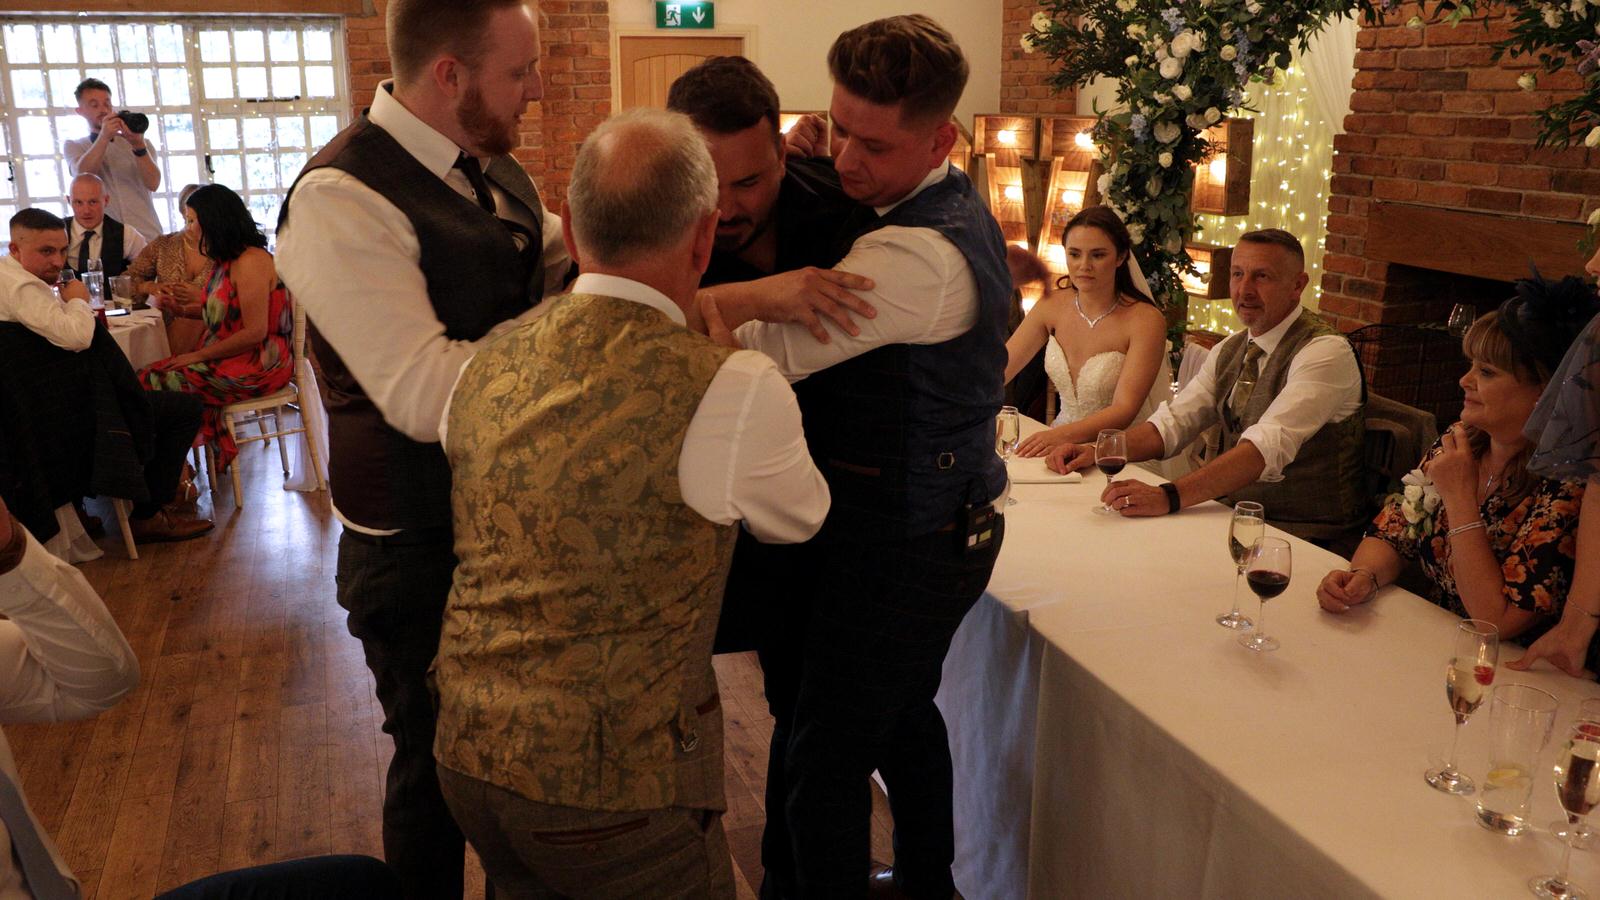 guests help the singing waiter after his fall